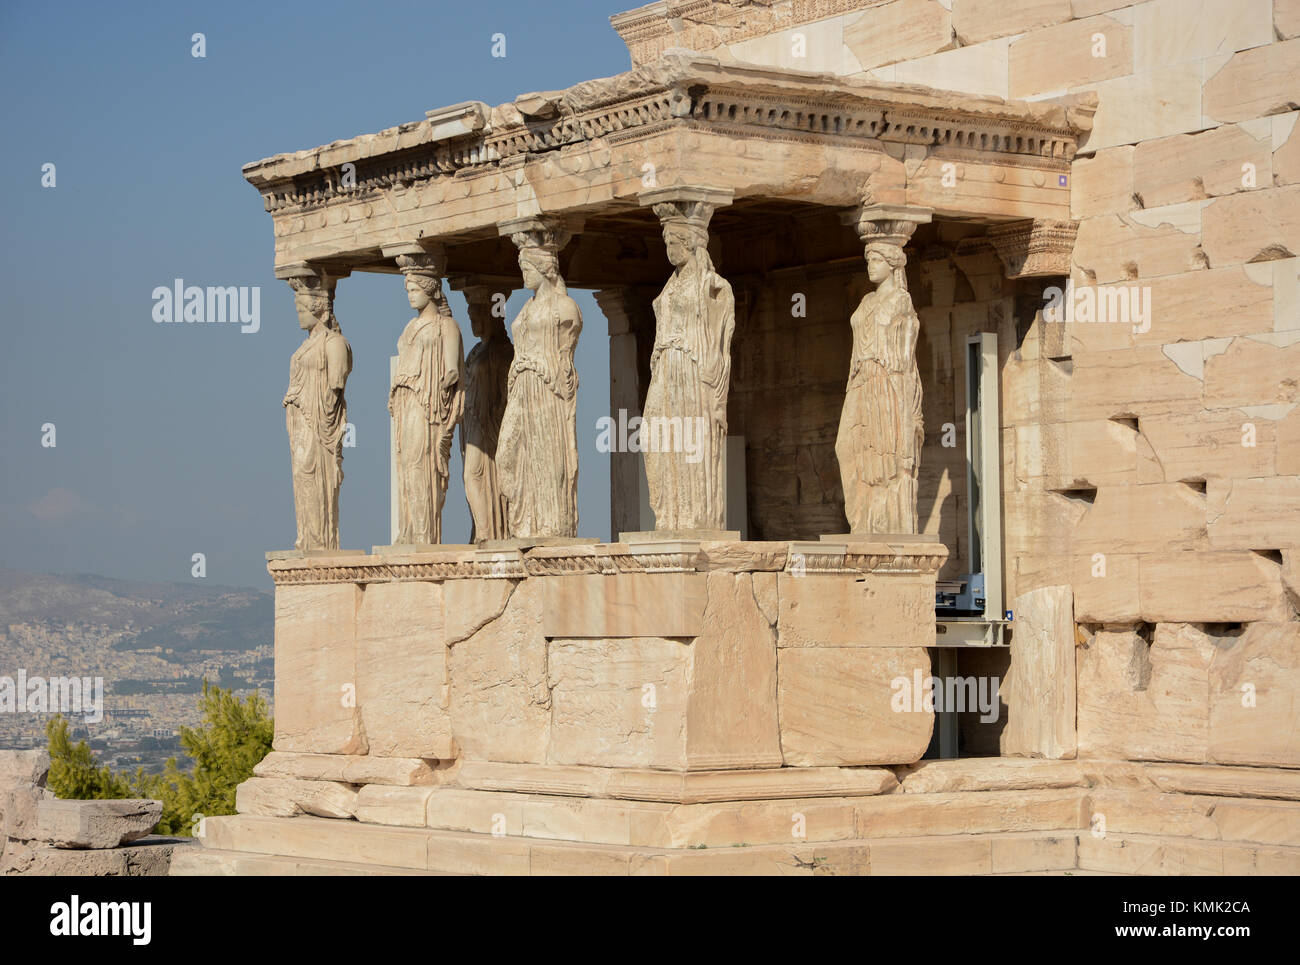 Landscape orientation view of the Erechtheion, Porch of the Maidens/Caryatids, 6 females, at the Acropolis in Athens, Greece on a sunny warm day Stock Photo